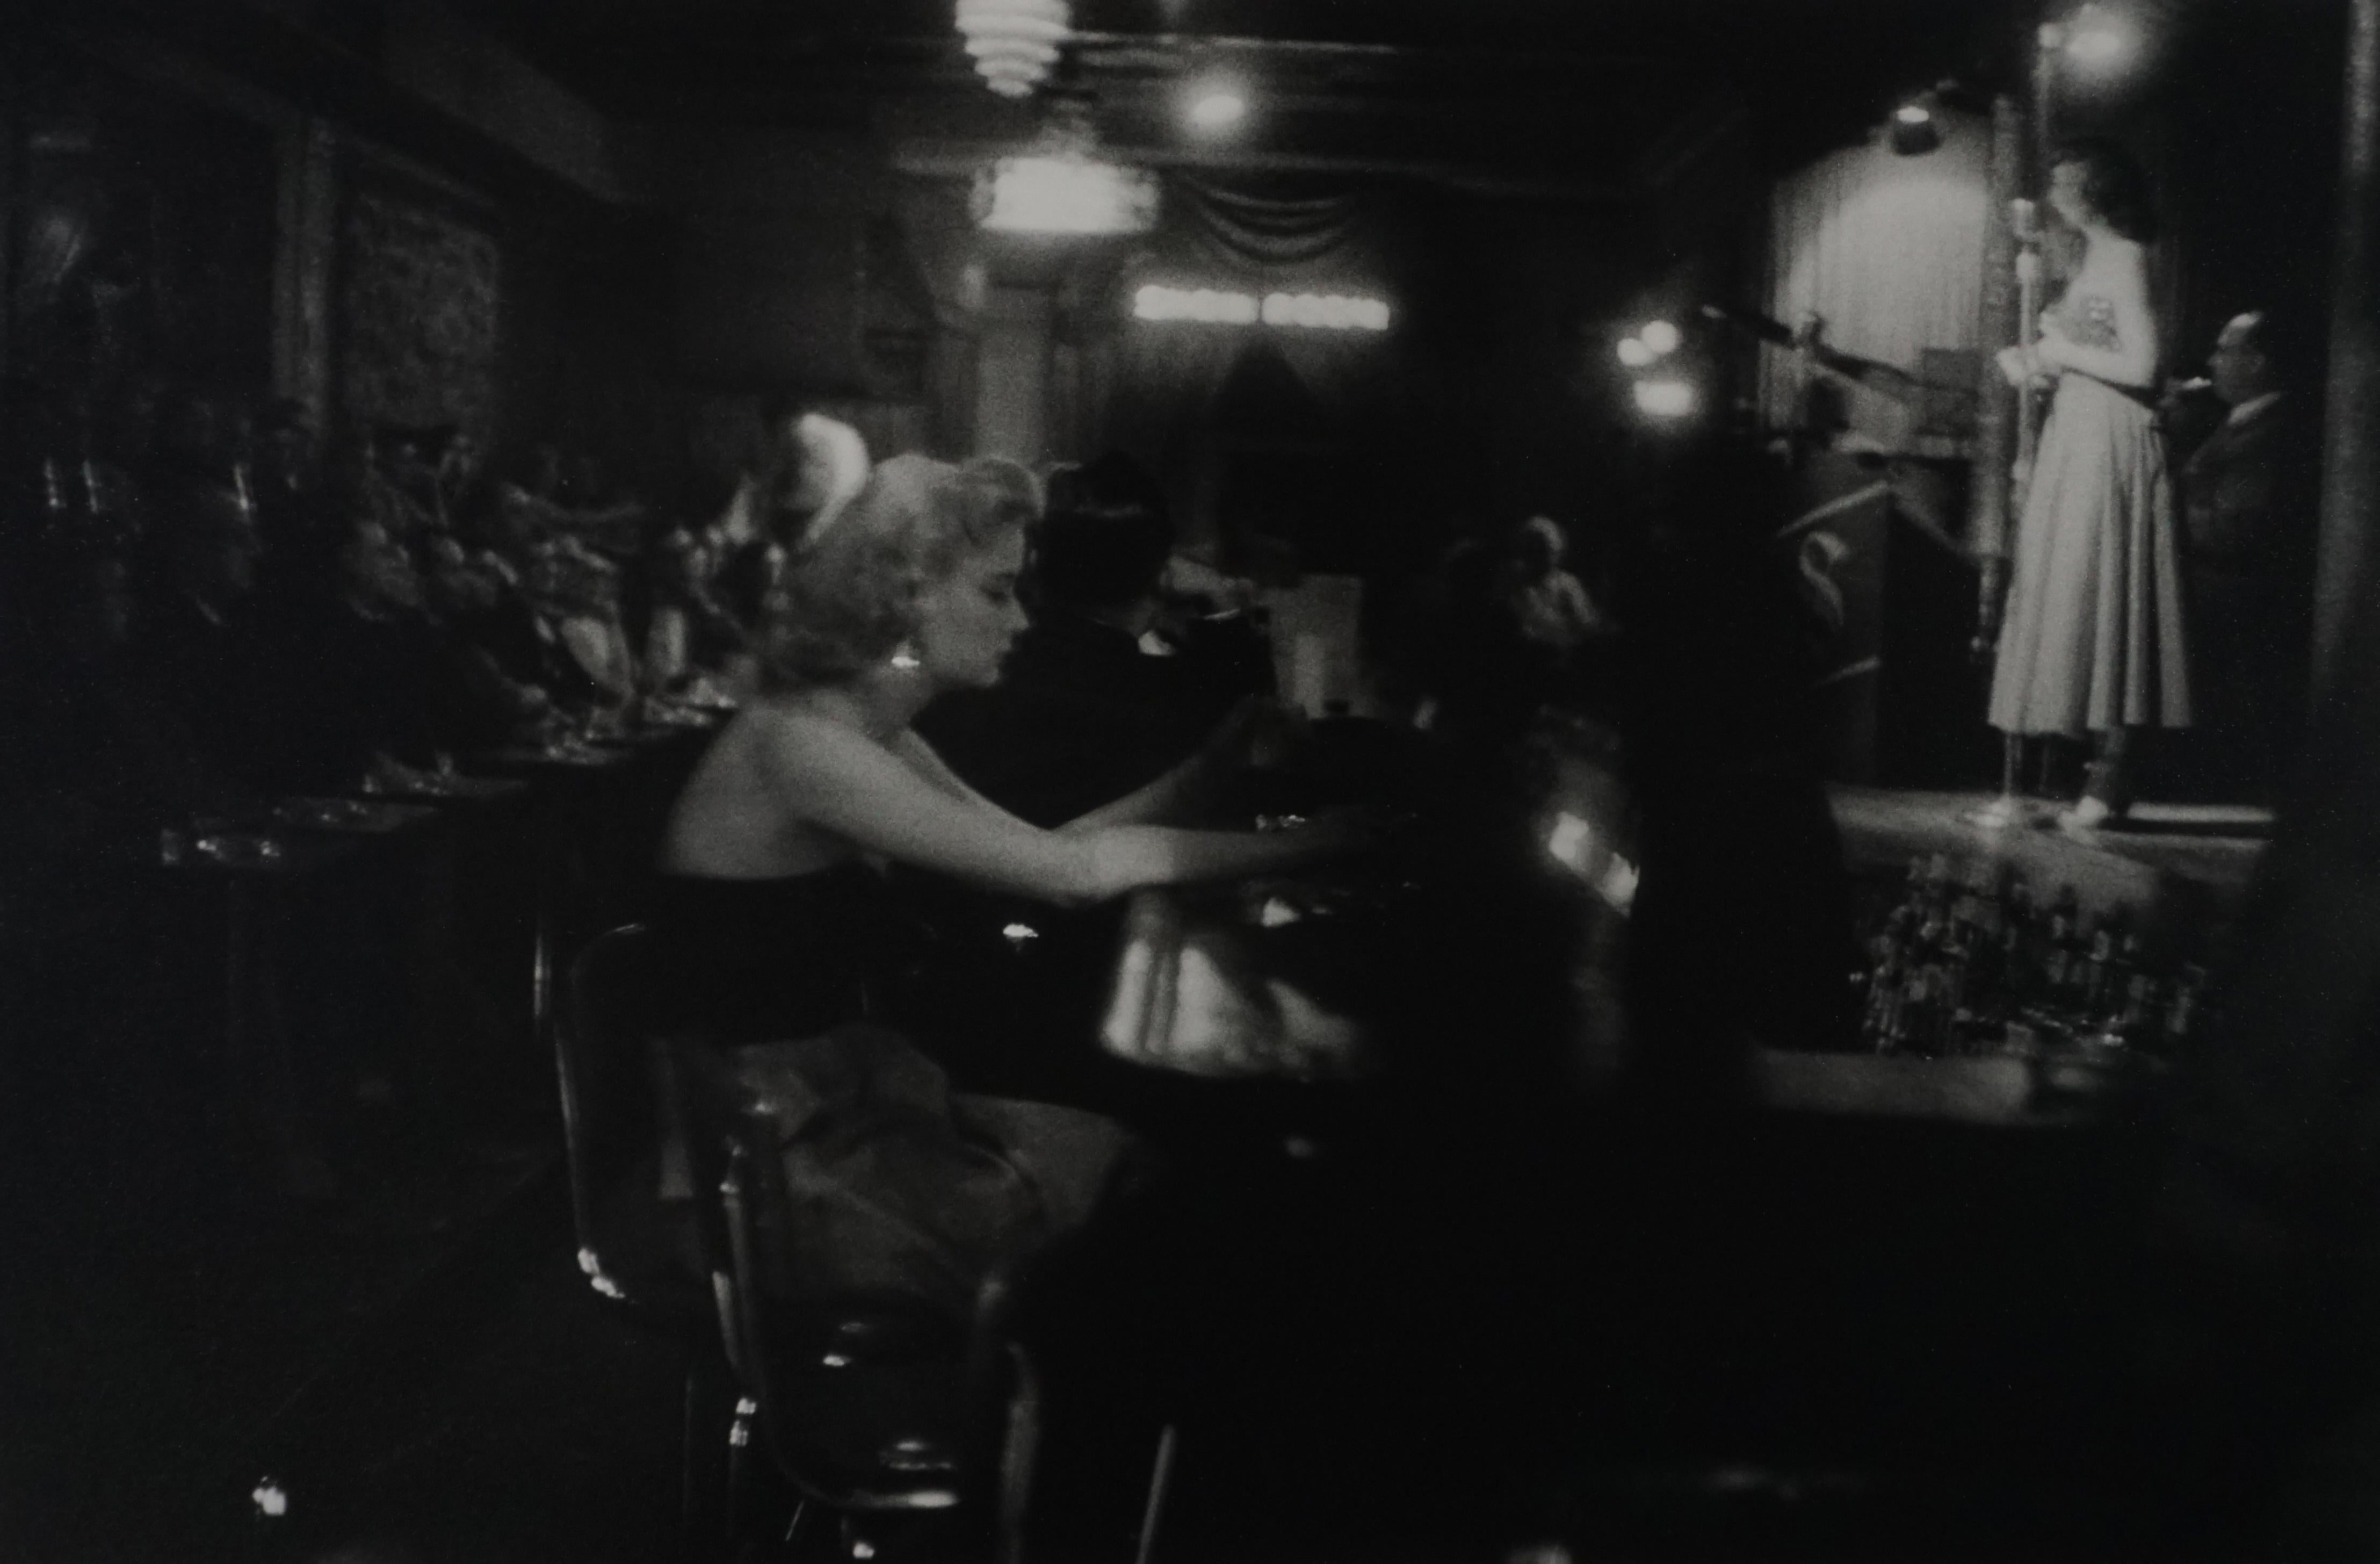 George S. Zimbel Black and White Photograph - Woman at The Bar, Bourbon Street, New Orleans , 1955 (printed 2008)